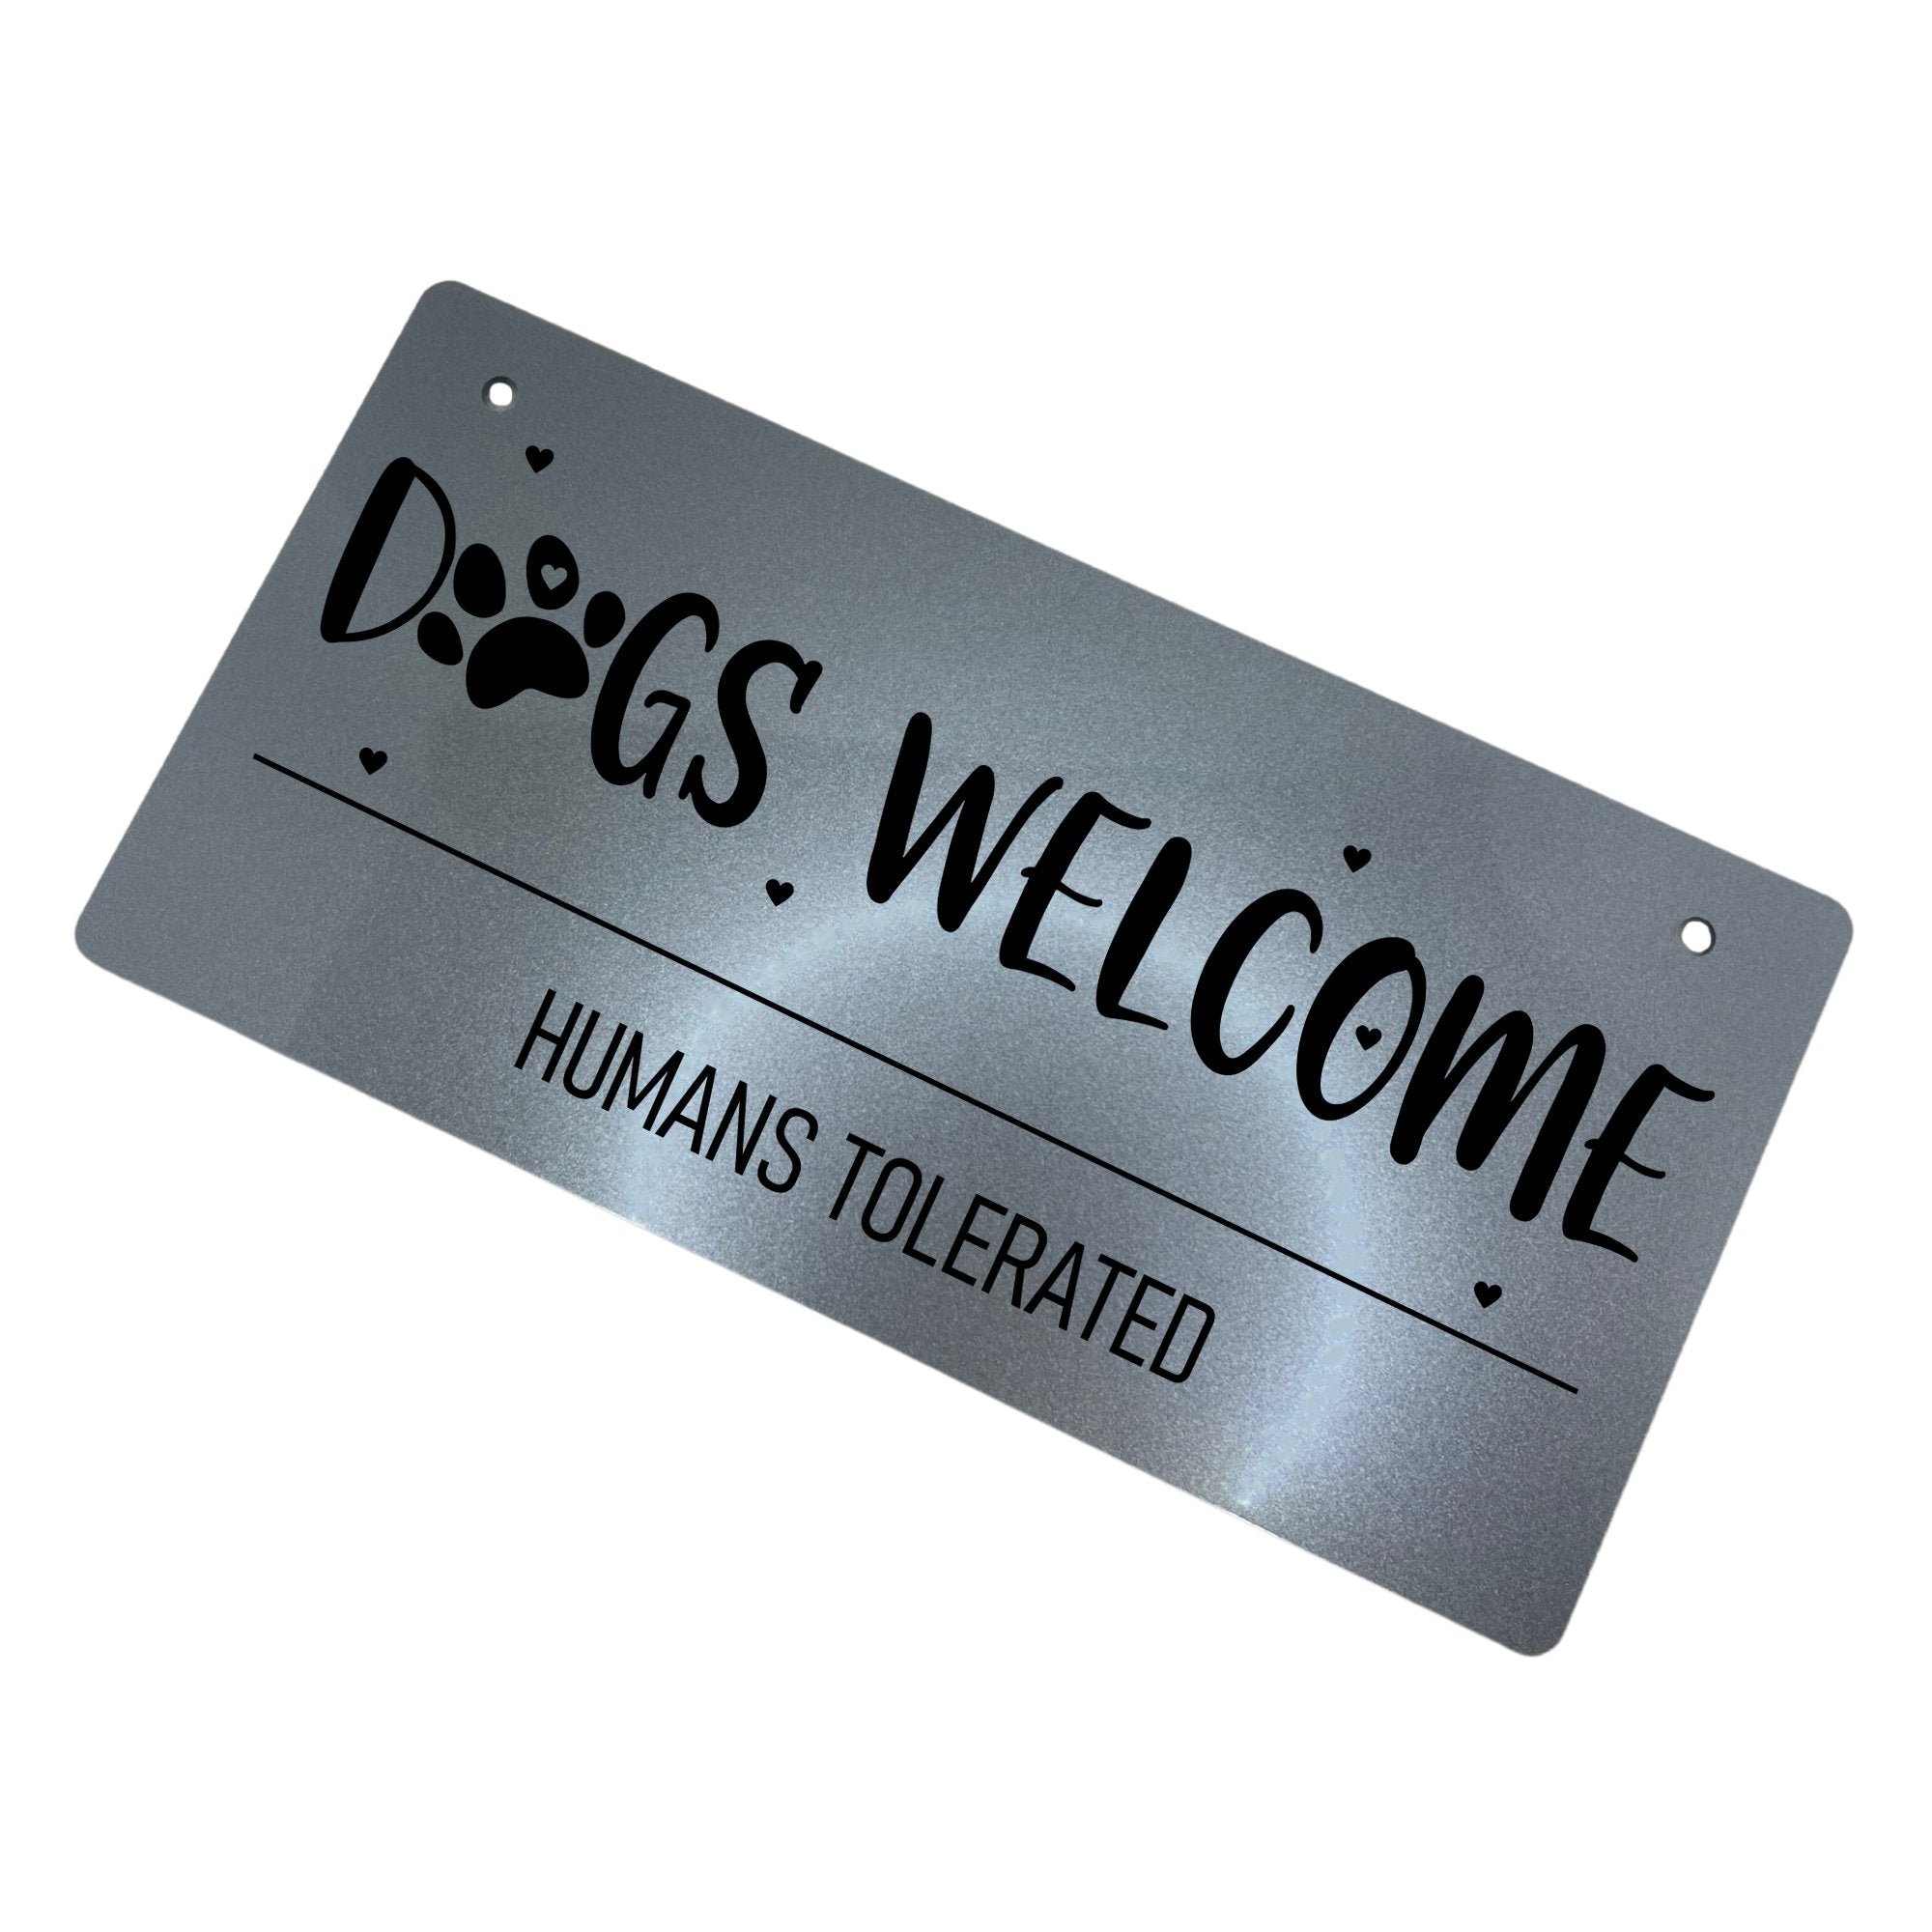 Sign showcased in a modern silver finish, providing a sleek and contemporary look to match different design preferences.